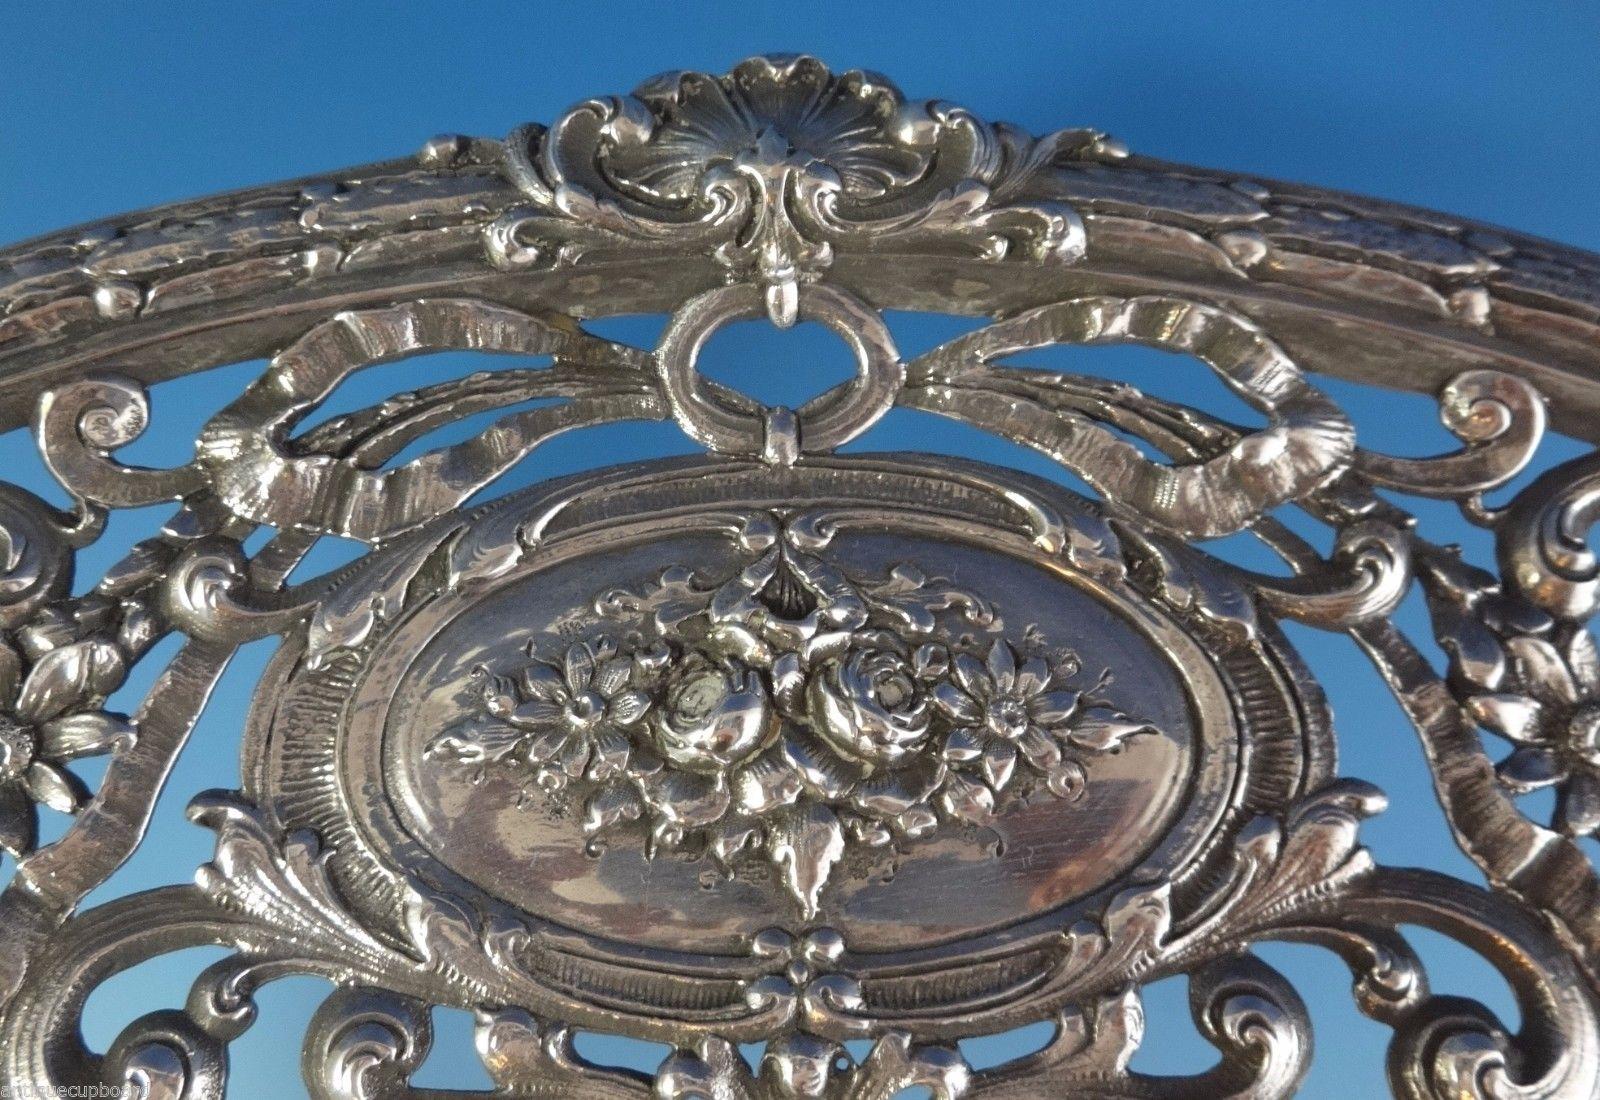 Redlich & Co
Very finely made sterling silver centerpiece bowl made by Redlich & Co, circa 1920-1930s. It features a 4 wide floral ribbon and medallion pierced design. It is monogrammed in the center and hallmarked with #8388. It measures 2 1/2 x 18